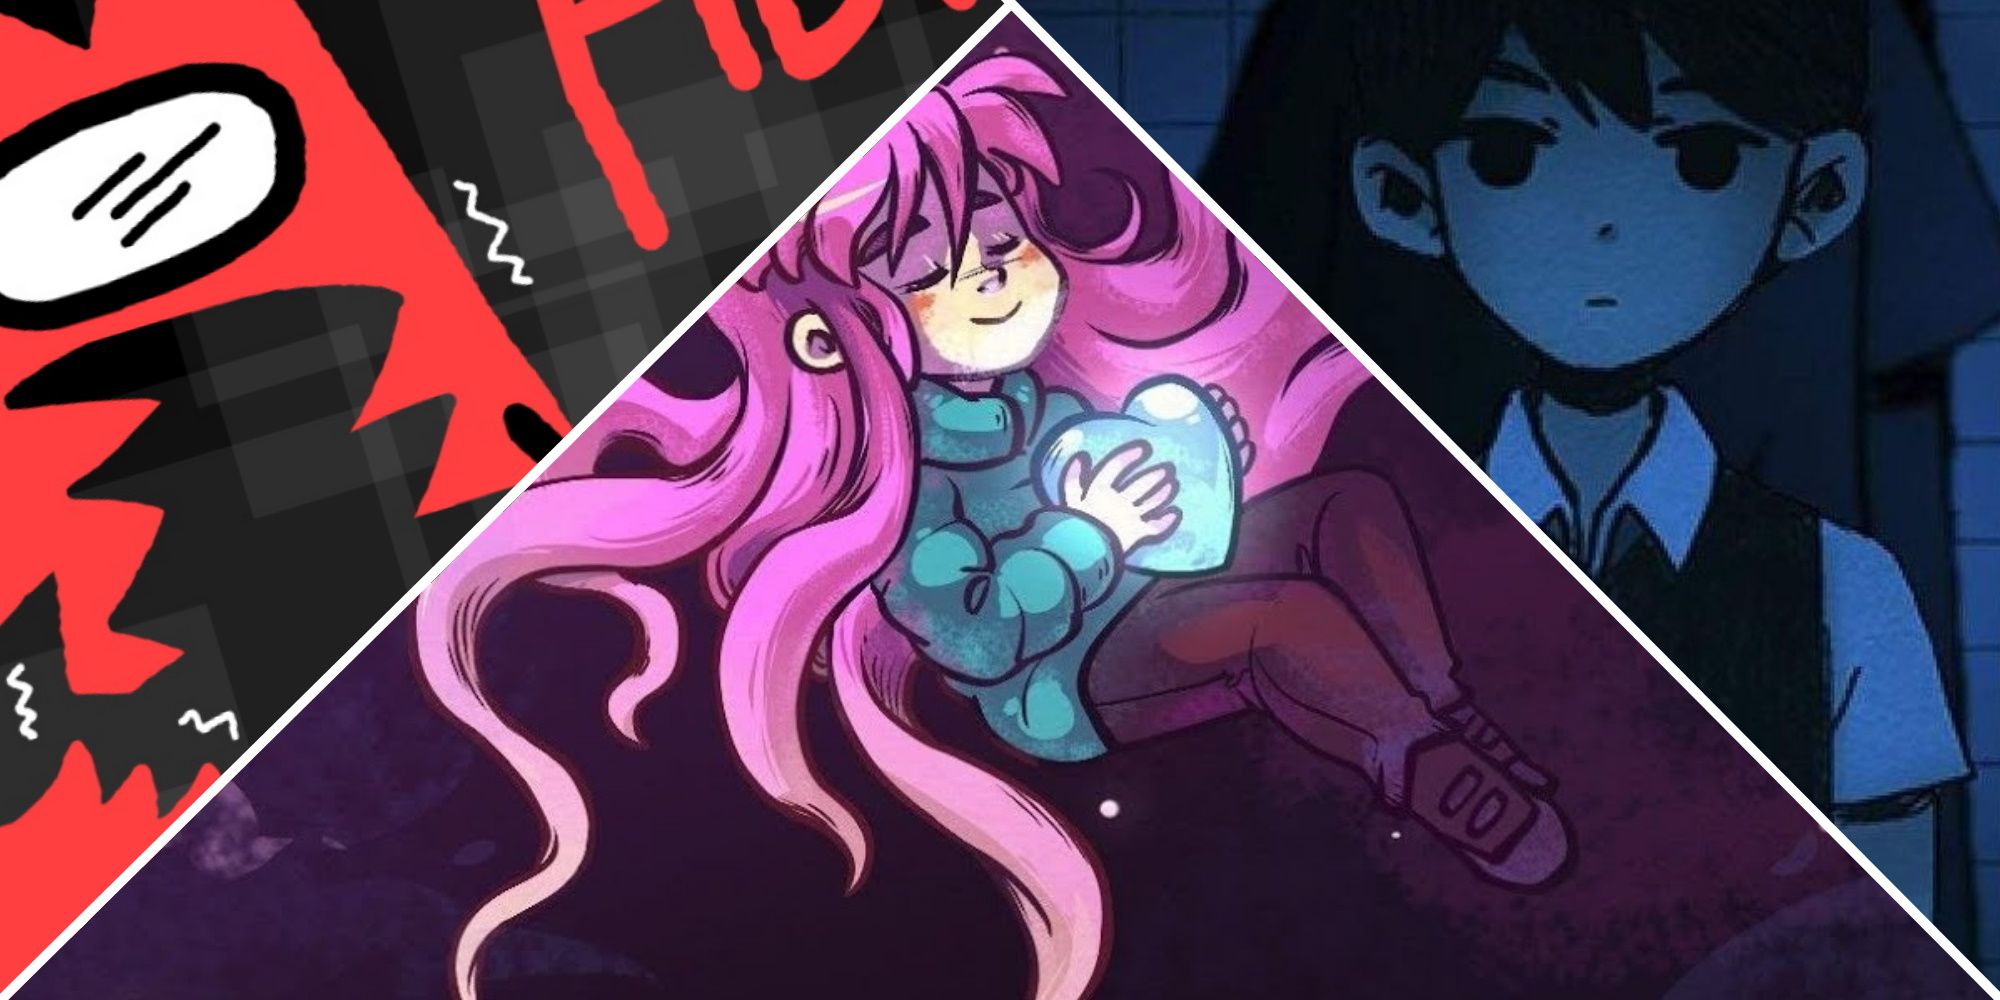 Adventures with Anxiety, Celeste, and Omori